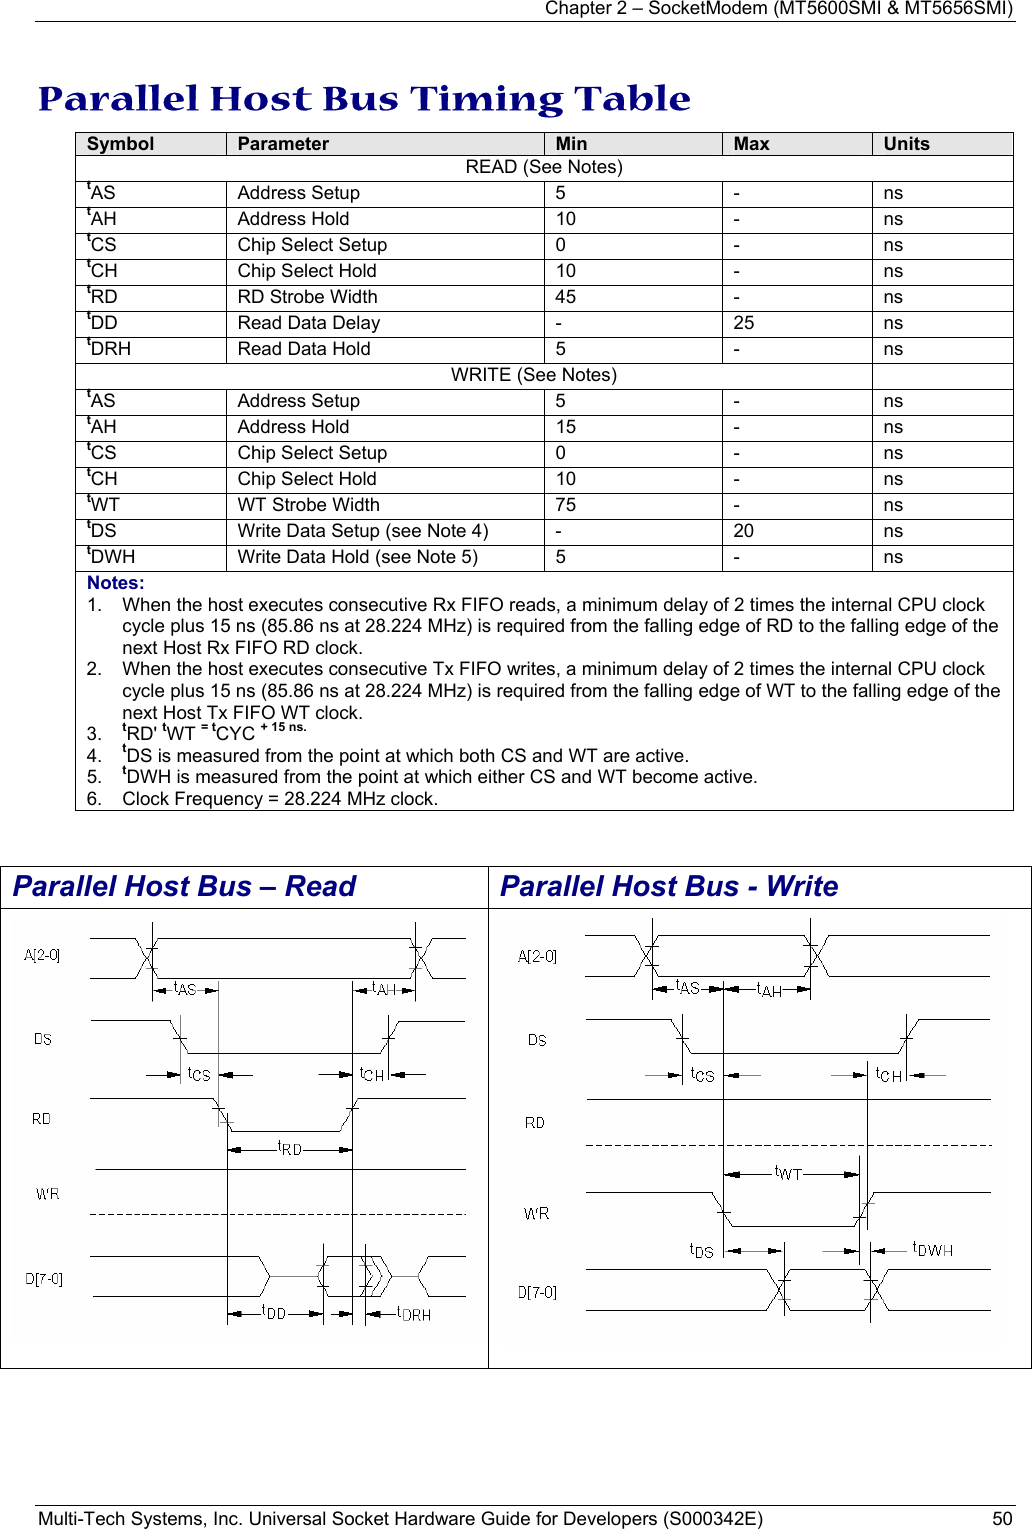 Chapter 2 – SocketModem (MT5600SMI &amp; MT5656SMI) Multi-Tech Systems, Inc. Universal Socket Hardware Guide for Developers (S000342E)  50  Parallel Host Bus Timing Table Symbol  Parameter  Min  Max  Units READ (See Notes) tAS  Address Setup  5  -  ns tAH  Address Hold  10  -  ns tCS  Chip Select Setup  0  -  ns tCH Chip Select Hold  10  -  ns tRD RD Strobe Width  45  -  ns tDD Read Data Delay  -  25  ns tDRH Read Data Hold  5  -  ns                        WRITE (See Notes)   tAS  Address Setup  5  -  ns tAH  Address Hold  15  -  ns tCS  Chip Select Setup  0  -  ns tCH Chip Select Hold  10  -  ns tWT WT Strobe Width  75  -  ns tDS Write Data Setup (see Note 4)  -  20  ns tDWH Write Data Hold (see Note 5)  5  -  ns Notes: 1.  When the host executes consecutive Rx FIFO reads, a minimum delay of 2 times the internal CPU clock cycle plus 15 ns (85.86 ns at 28.224 MHz) is required from the falling edge of RD to the falling edge of the next Host Rx FIFO RD clock. 2.  When the host executes consecutive Tx FIFO writes, a minimum delay of 2 times the internal CPU clock cycle plus 15 ns (85.86 ns at 28.224 MHz) is required from the falling edge of WT to the falling edge of the next Host Tx FIFO WT clock. 3.  tRD&apos; tWT = tCYC + 15 ns. 4.  tDS is measured from the point at which both CS and WT are active. 5.  tDWH is measured from the point at which either CS and WT become active. 6.  Clock Frequency = 28.224 MHz clock.   Parallel Host Bus – Read Parallel Host Bus - Write     